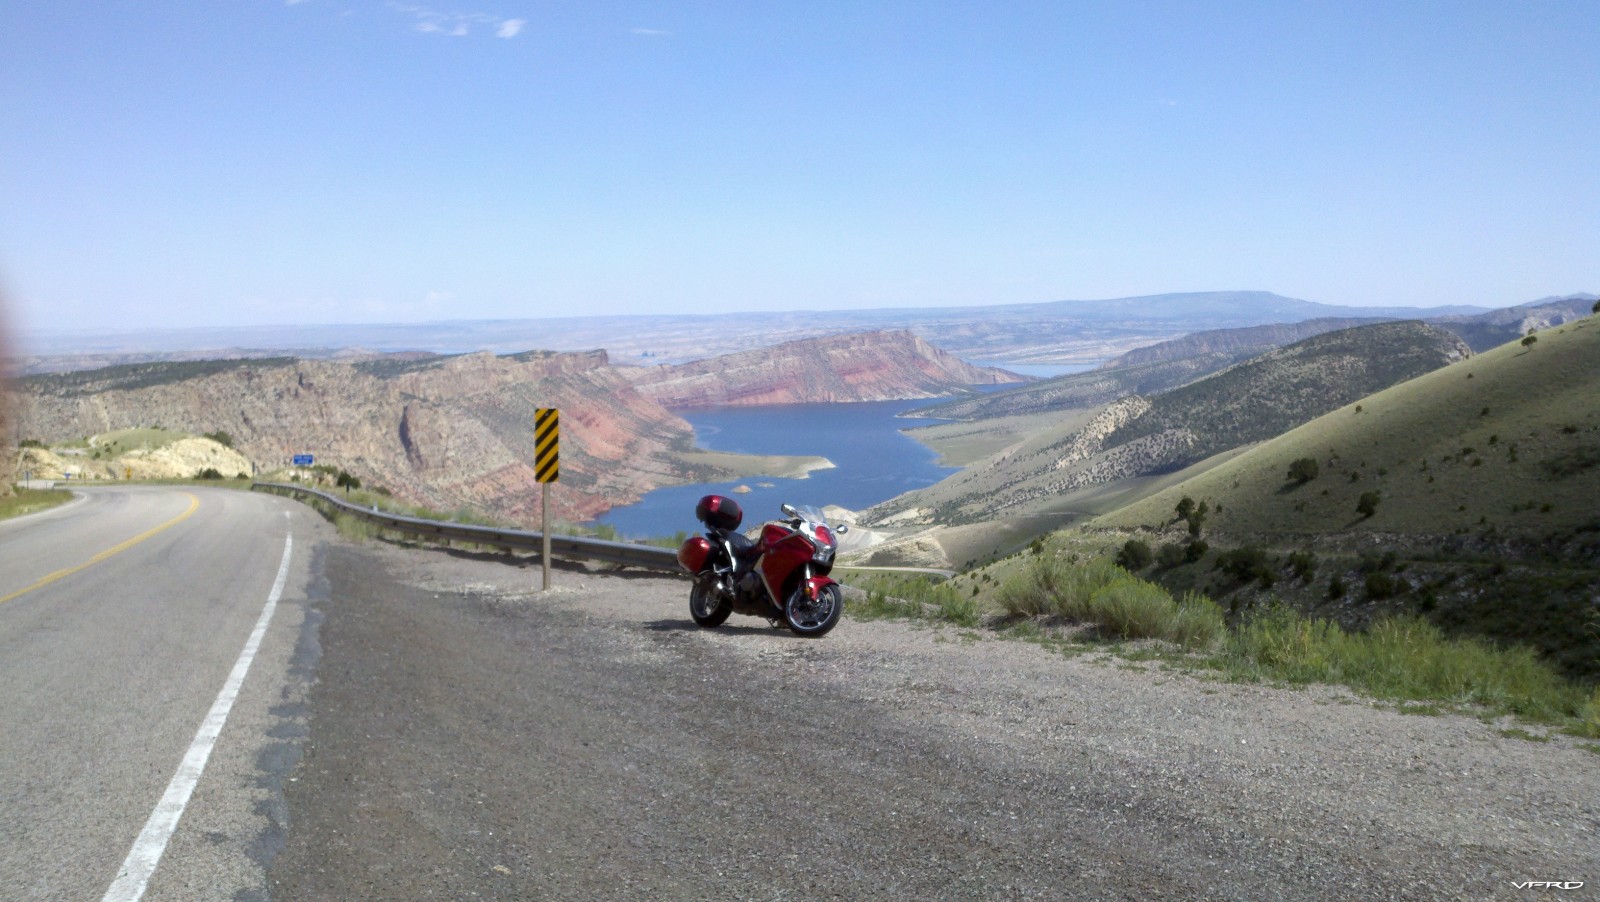 The Flaming Gorge